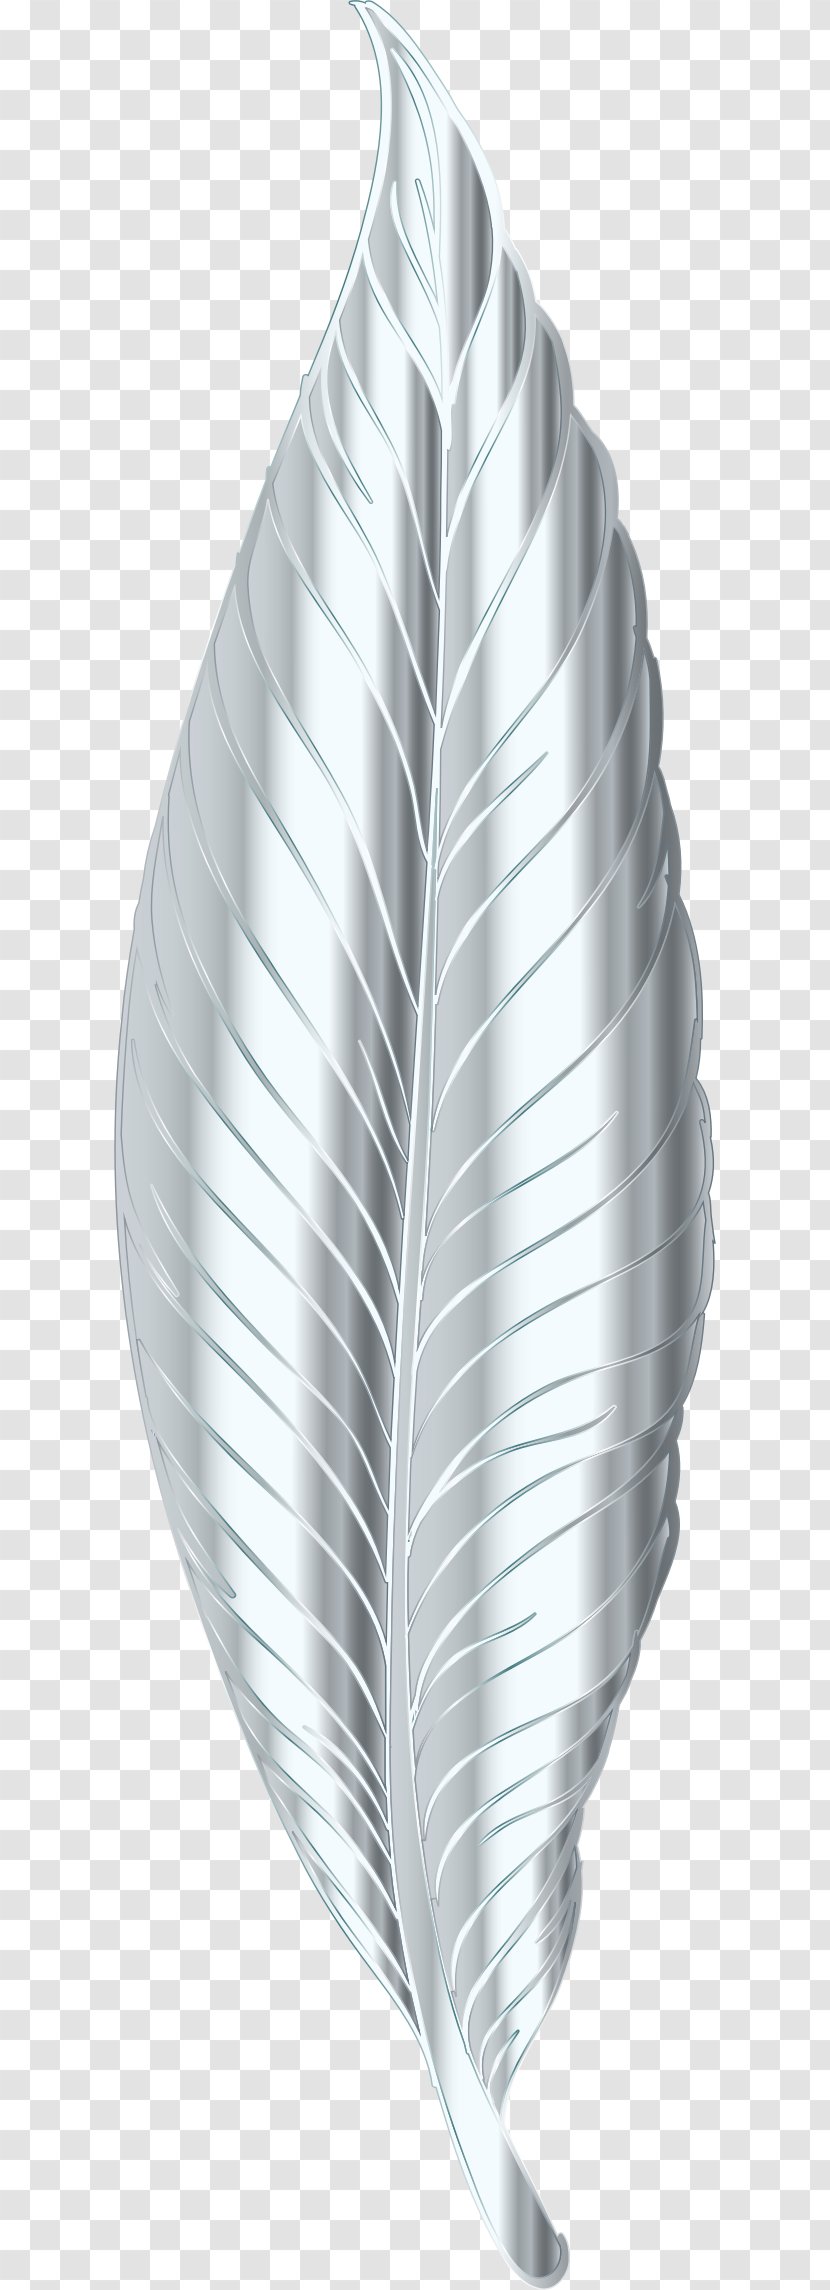 Bird Feather Silver Clip Art - Wing Transparent PNG